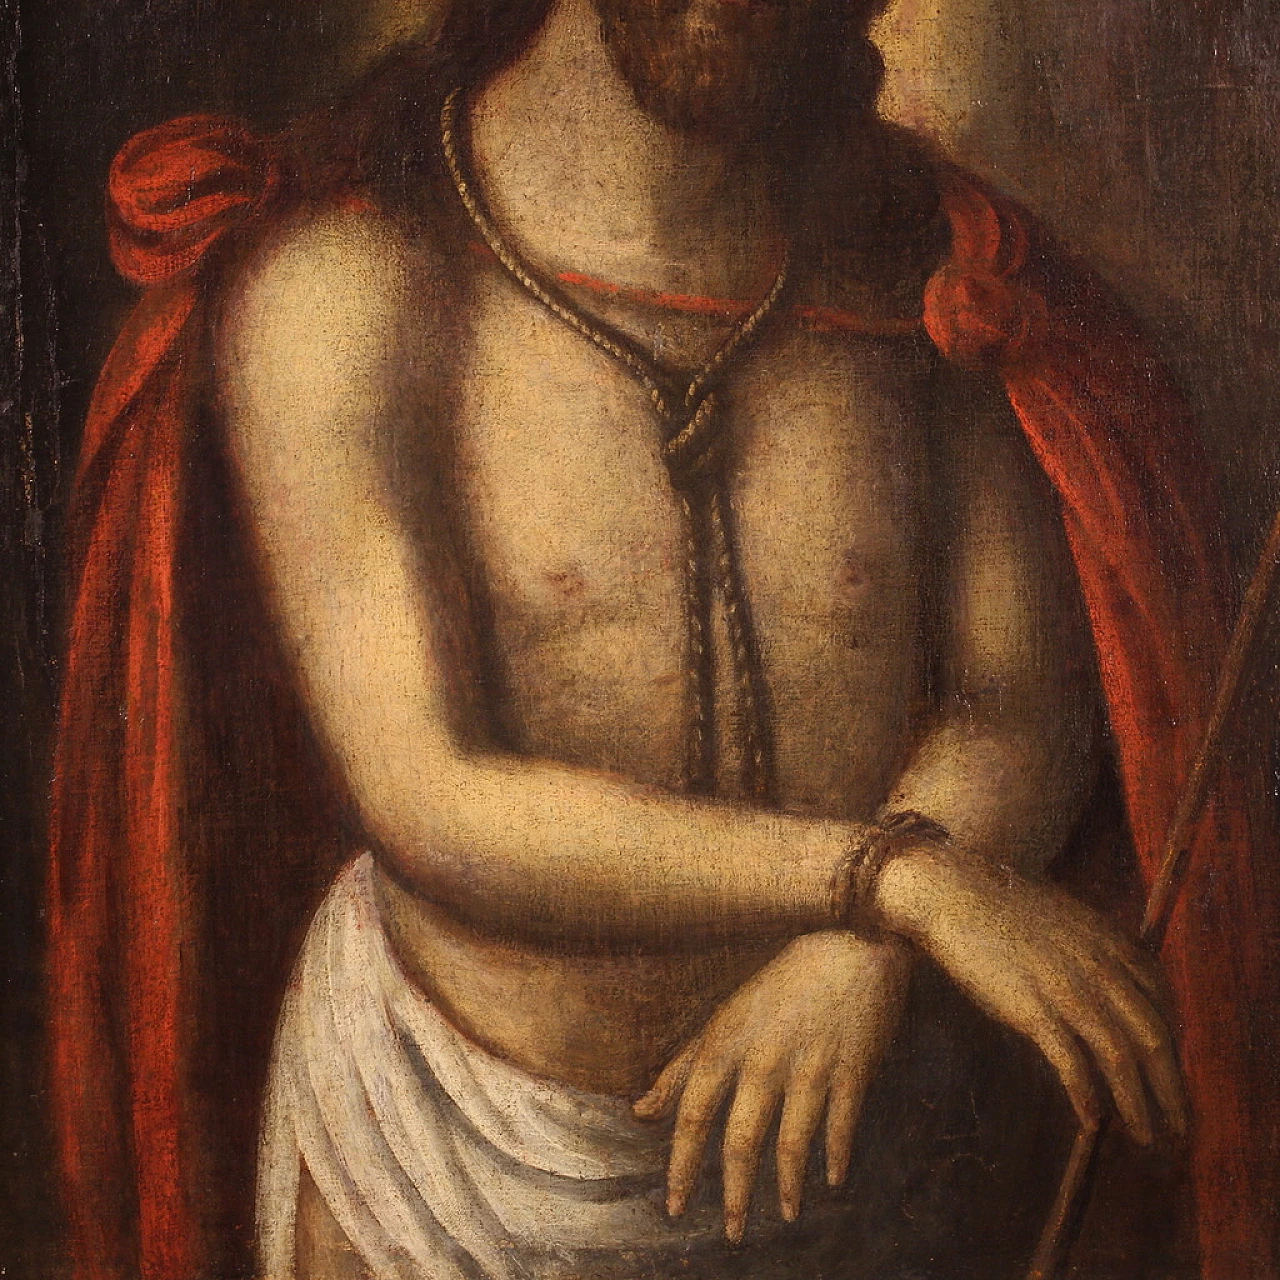 Ecce Homo painting, oil on canvas, 17th century 6